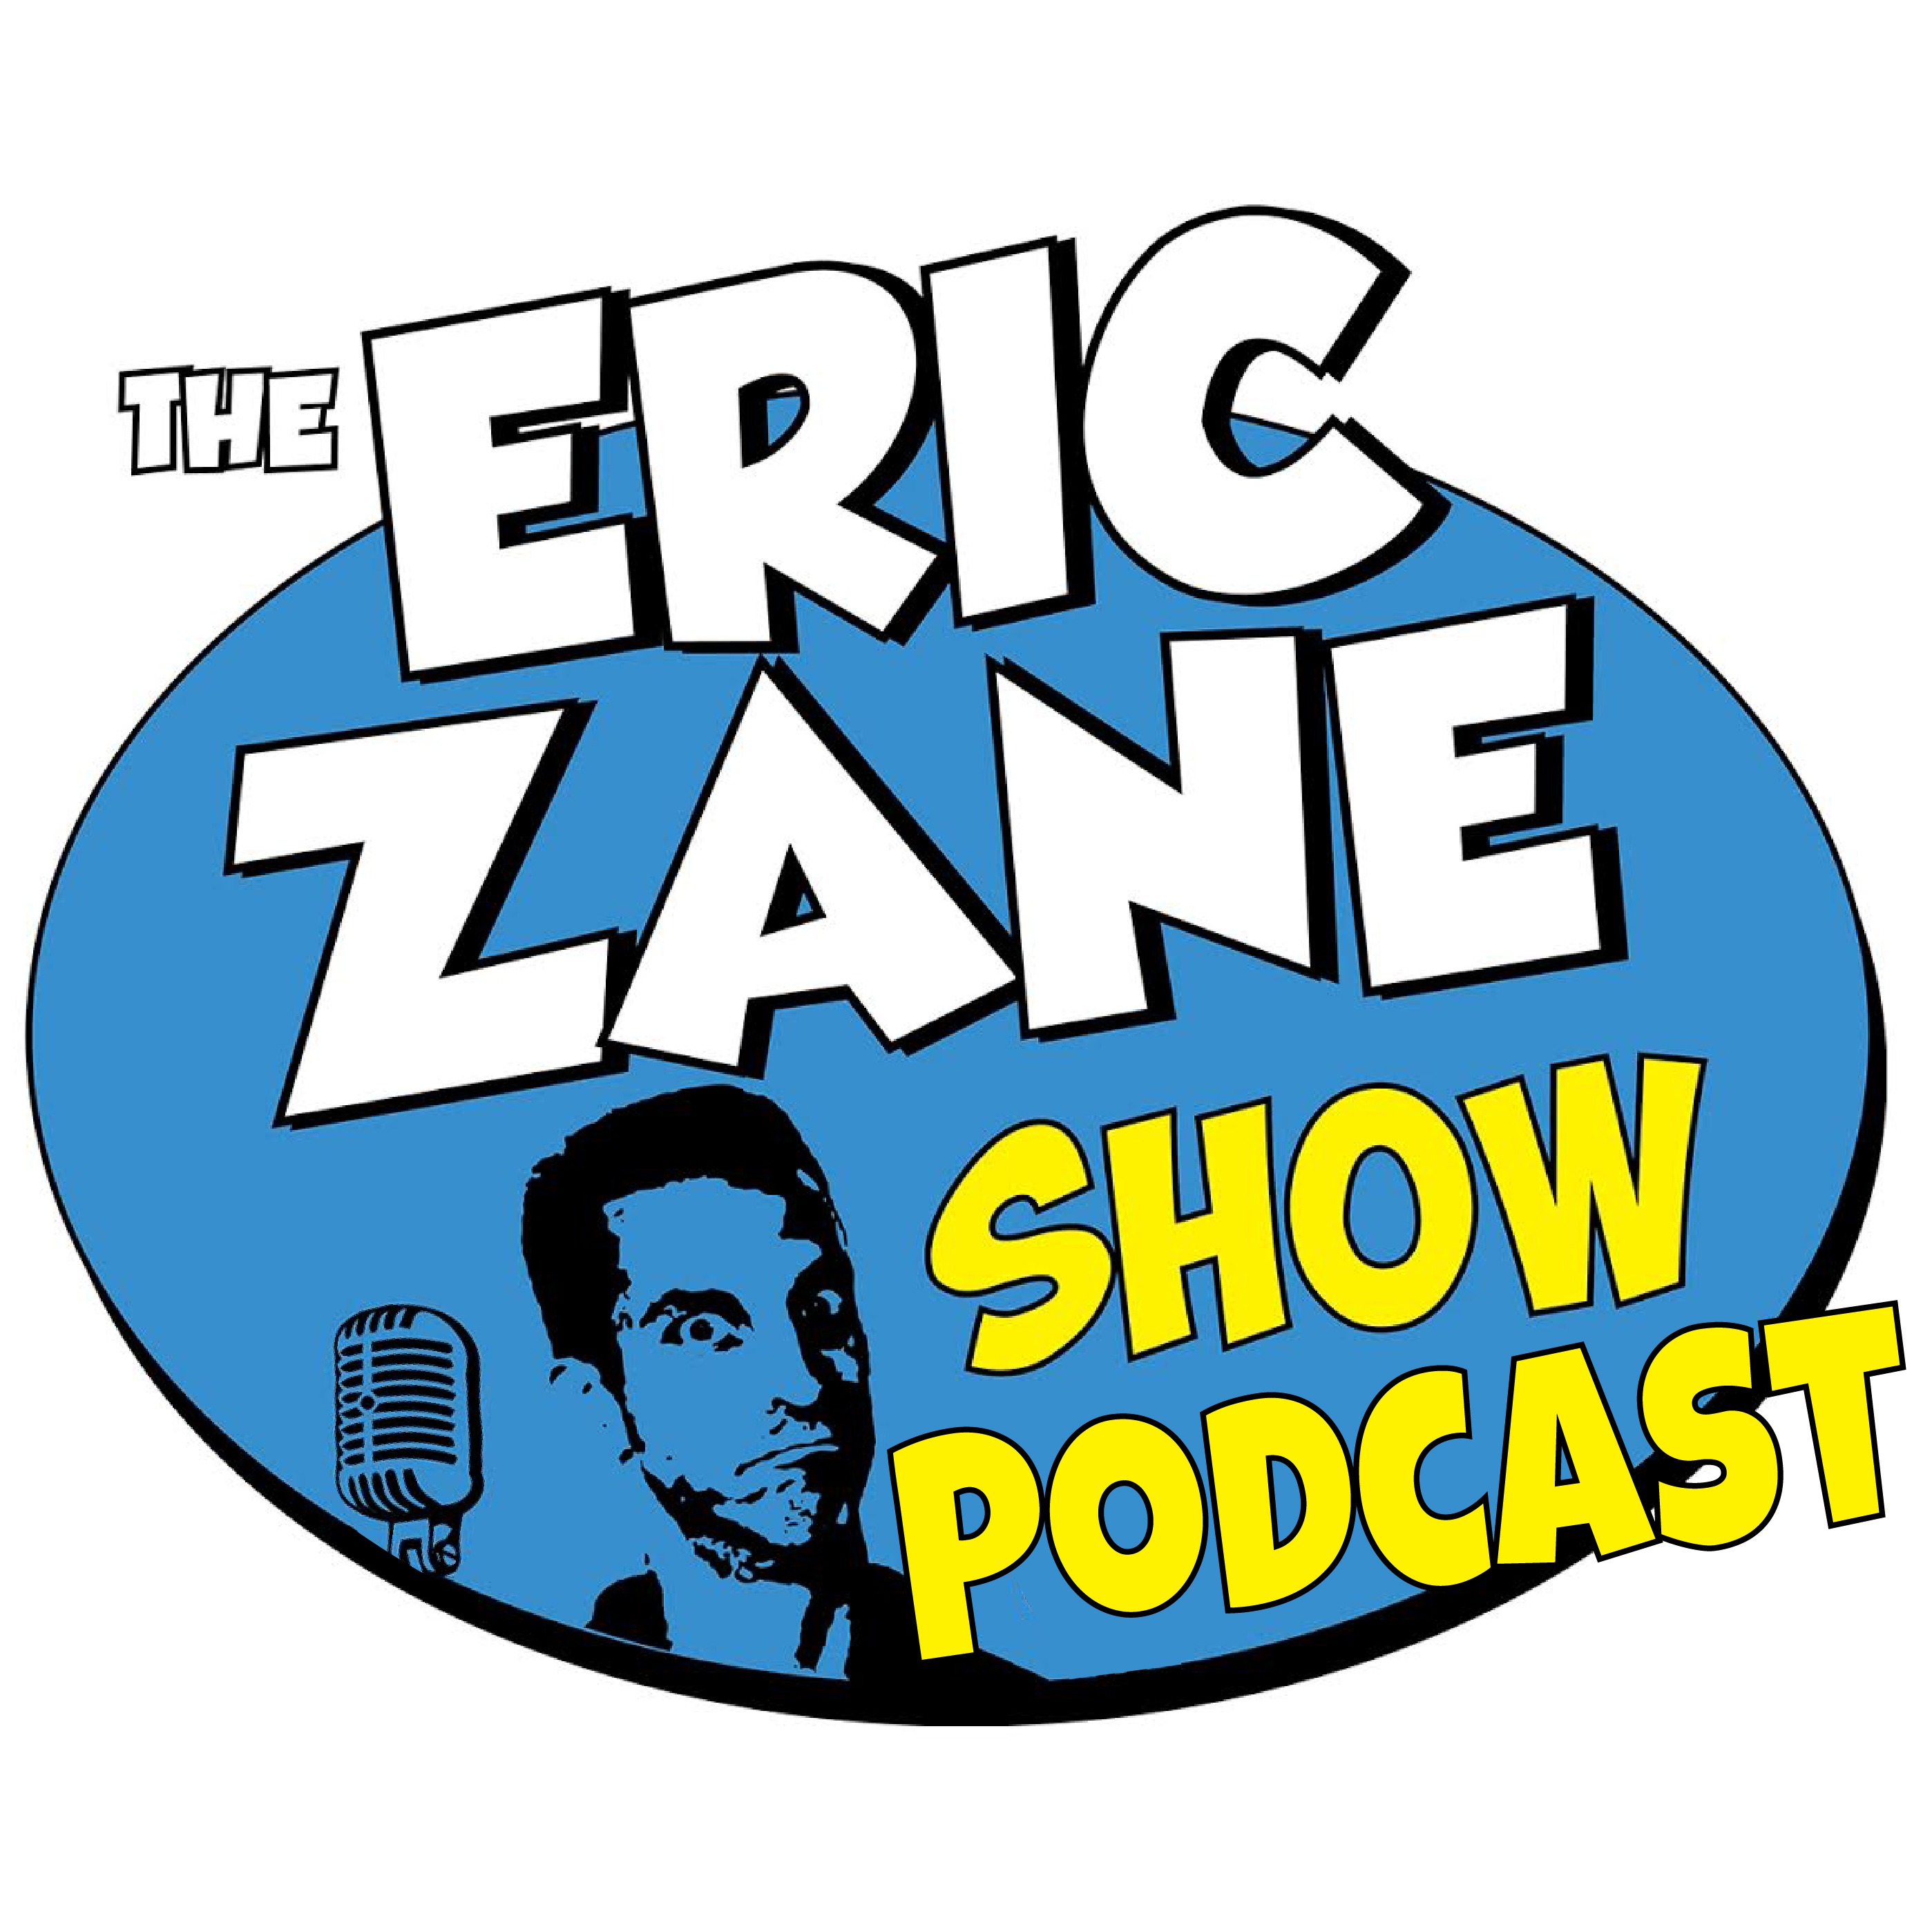 Eric Zane Show Podcast 997 - The State of the Union speech is becoming entertaining